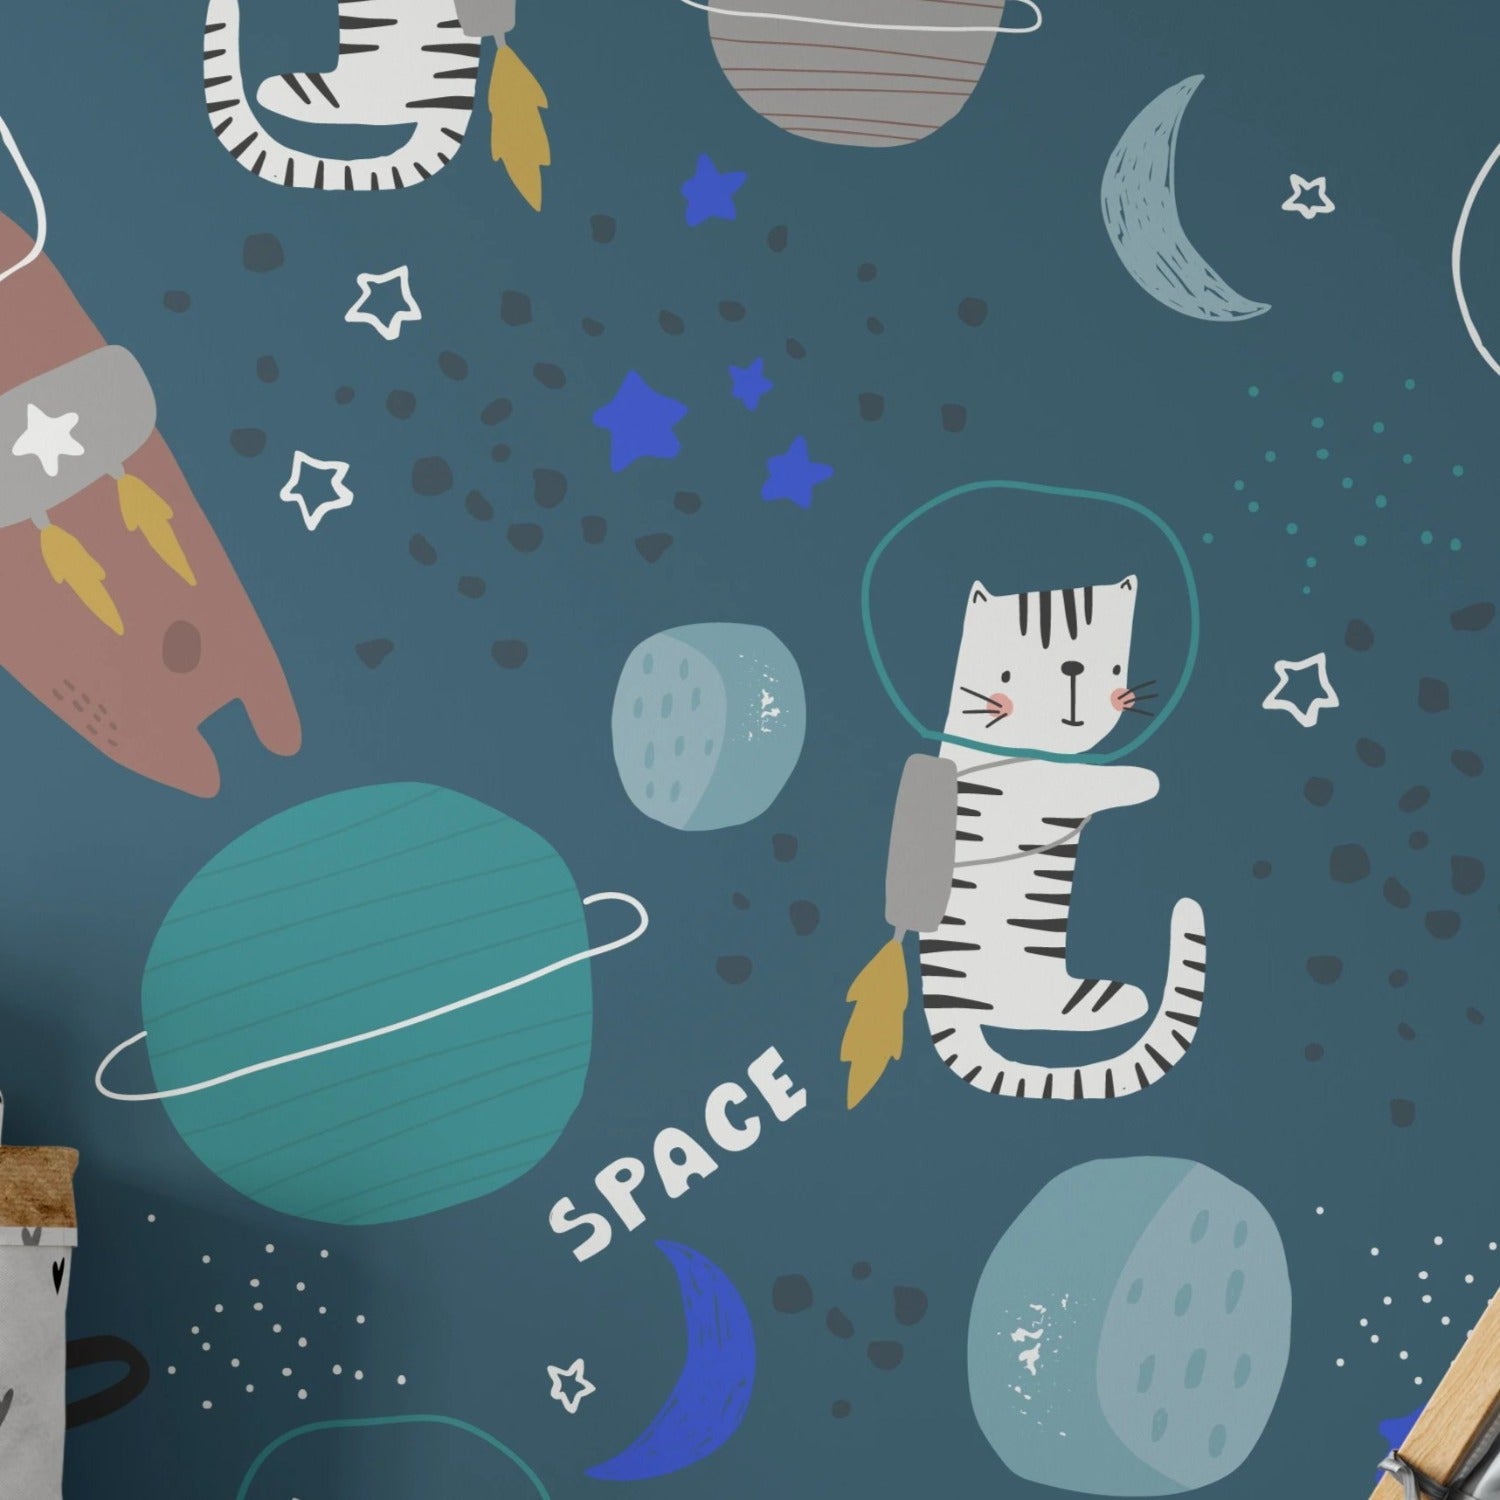 A playful illustration of a white tiger wearing a space helmet and a jetpack with yellow flames, surrounded by stars, planets, and moons, set against a dark blue background. The scene is filled with colorful space elements.